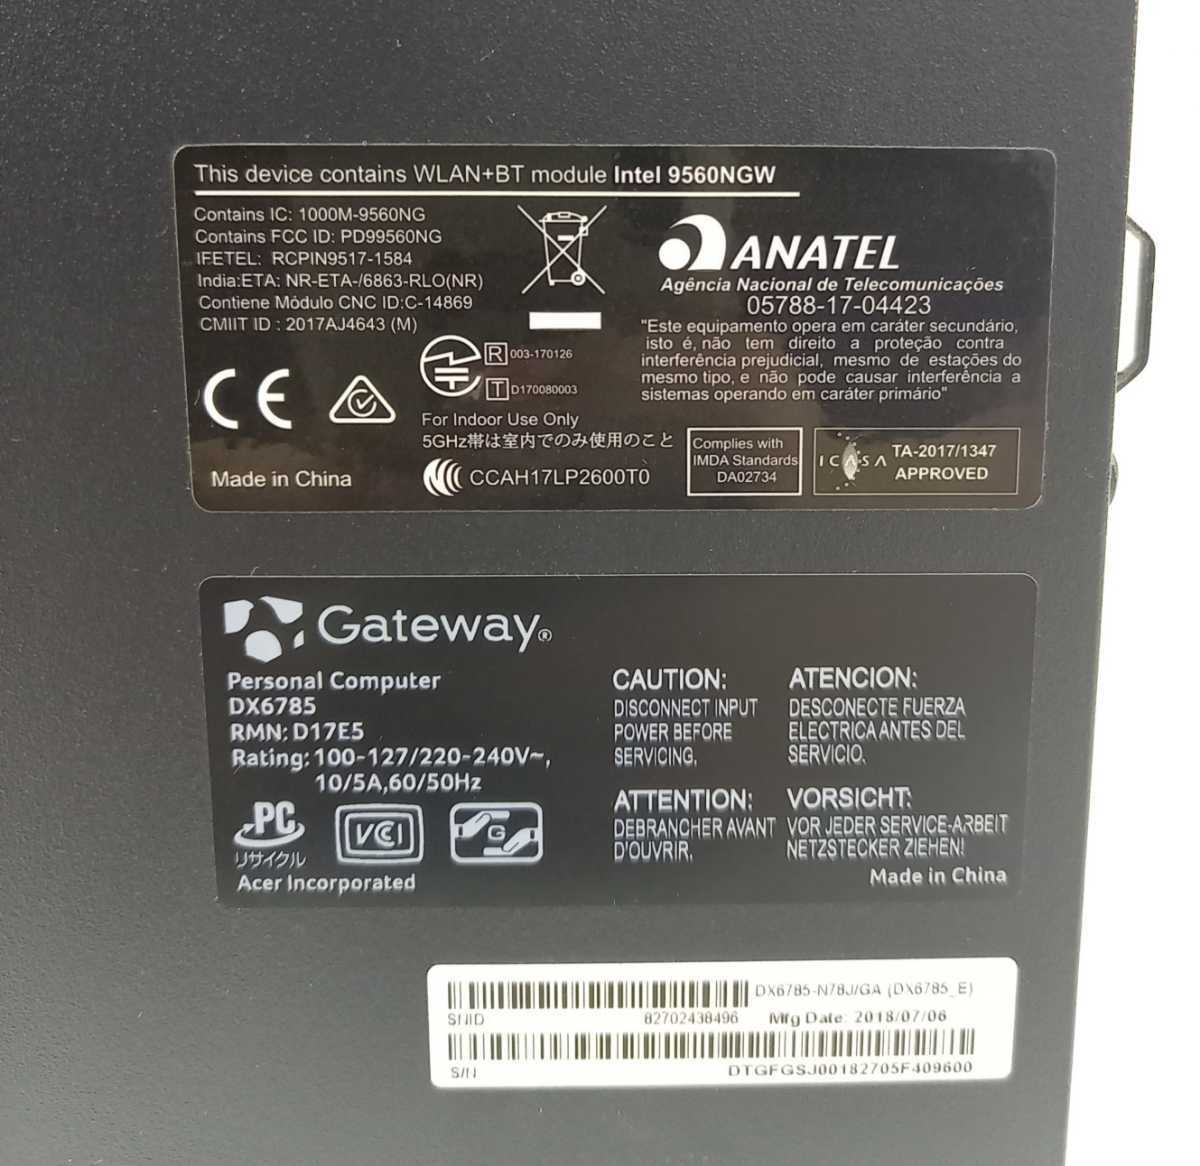 D ゲーミングPC Gateway DX6785-N78J GA Core i7/メモリ 8GB/SSD 128GB+HDD 2TB 動作未確認  ゲートウェイ product details | Yahoo! Auctions Japan proxy bidding and shopping  service | FROM JAPAN